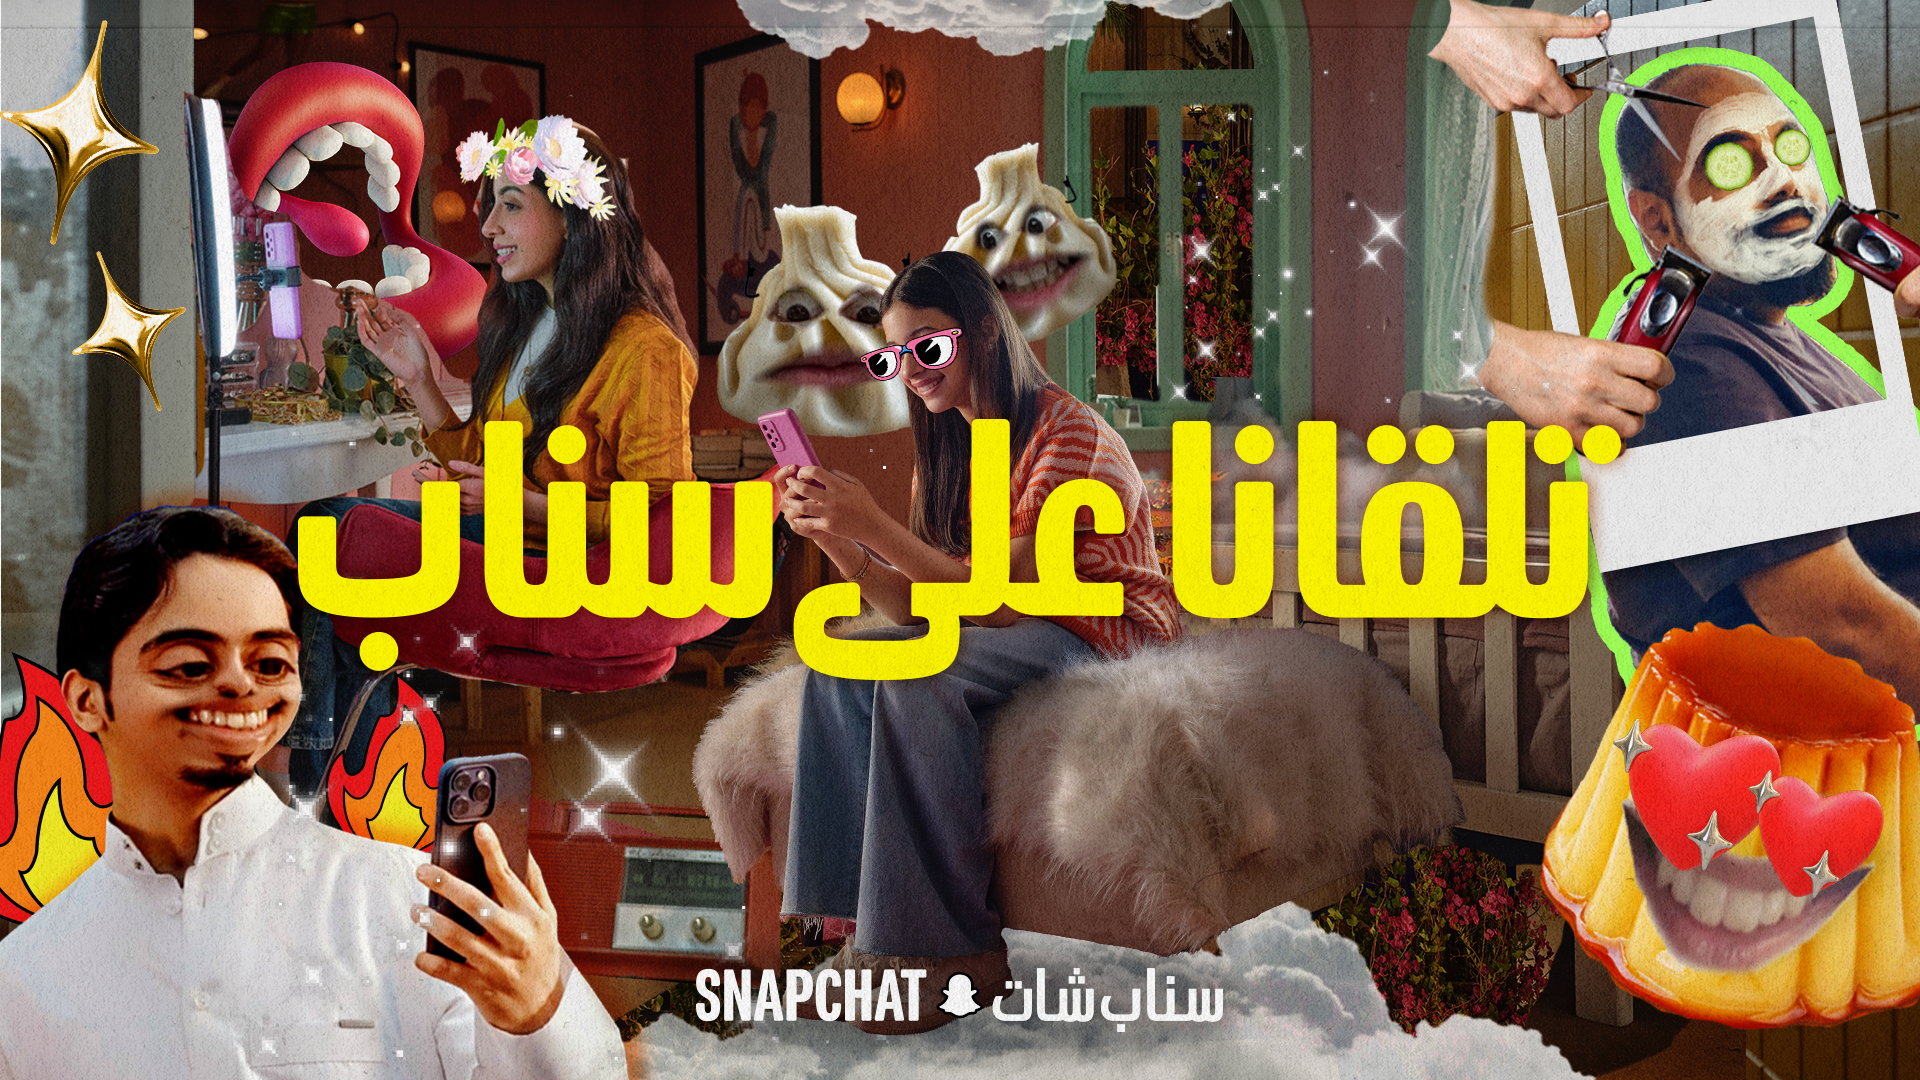 Snapchat Deepens Ties with Arab Communities Through New Campaign